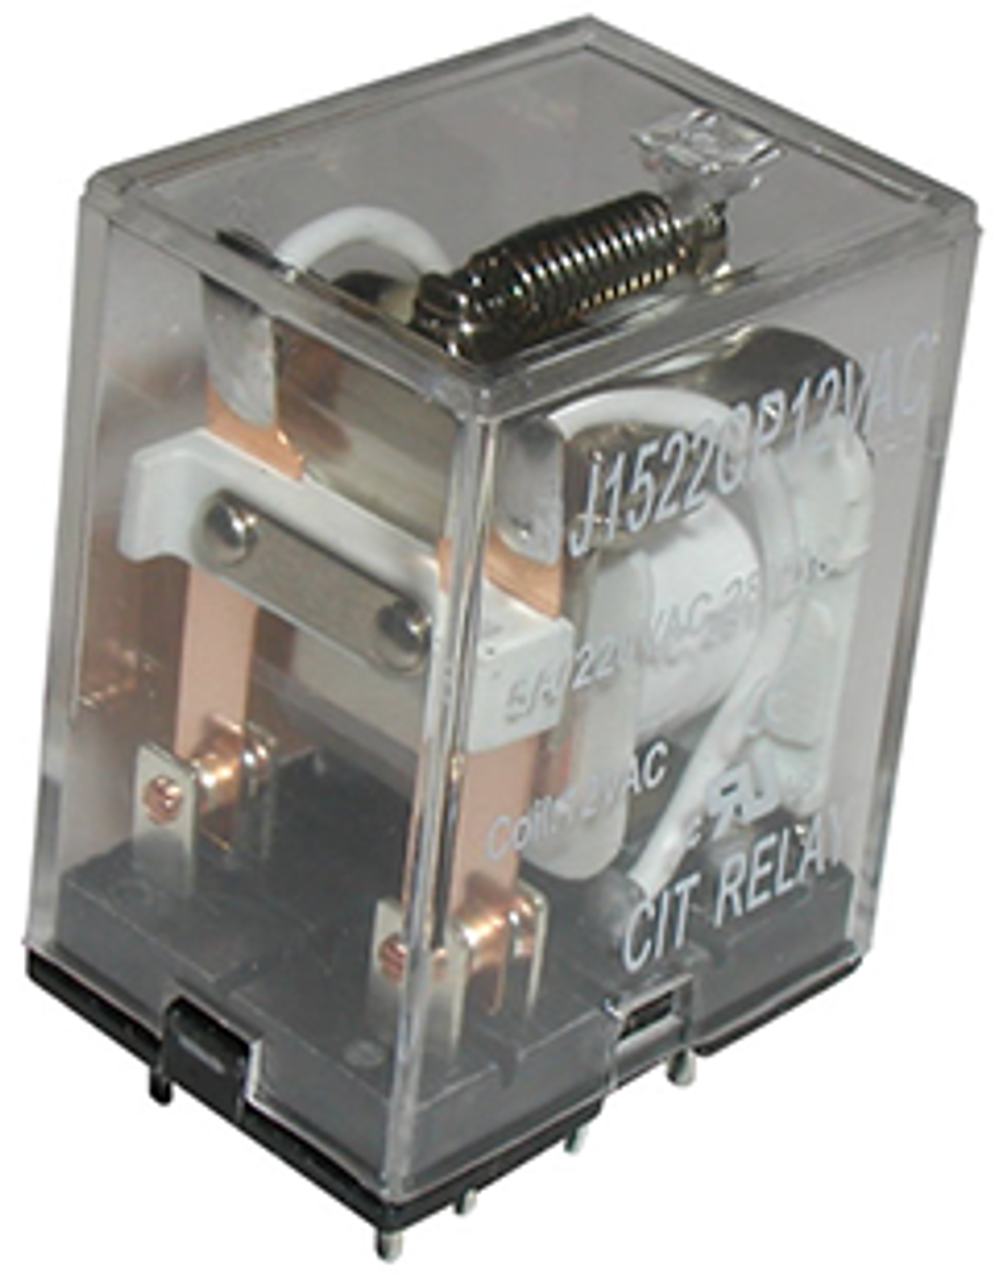 CIT Relay and Switch J1524CP12VACT Industrial Relays